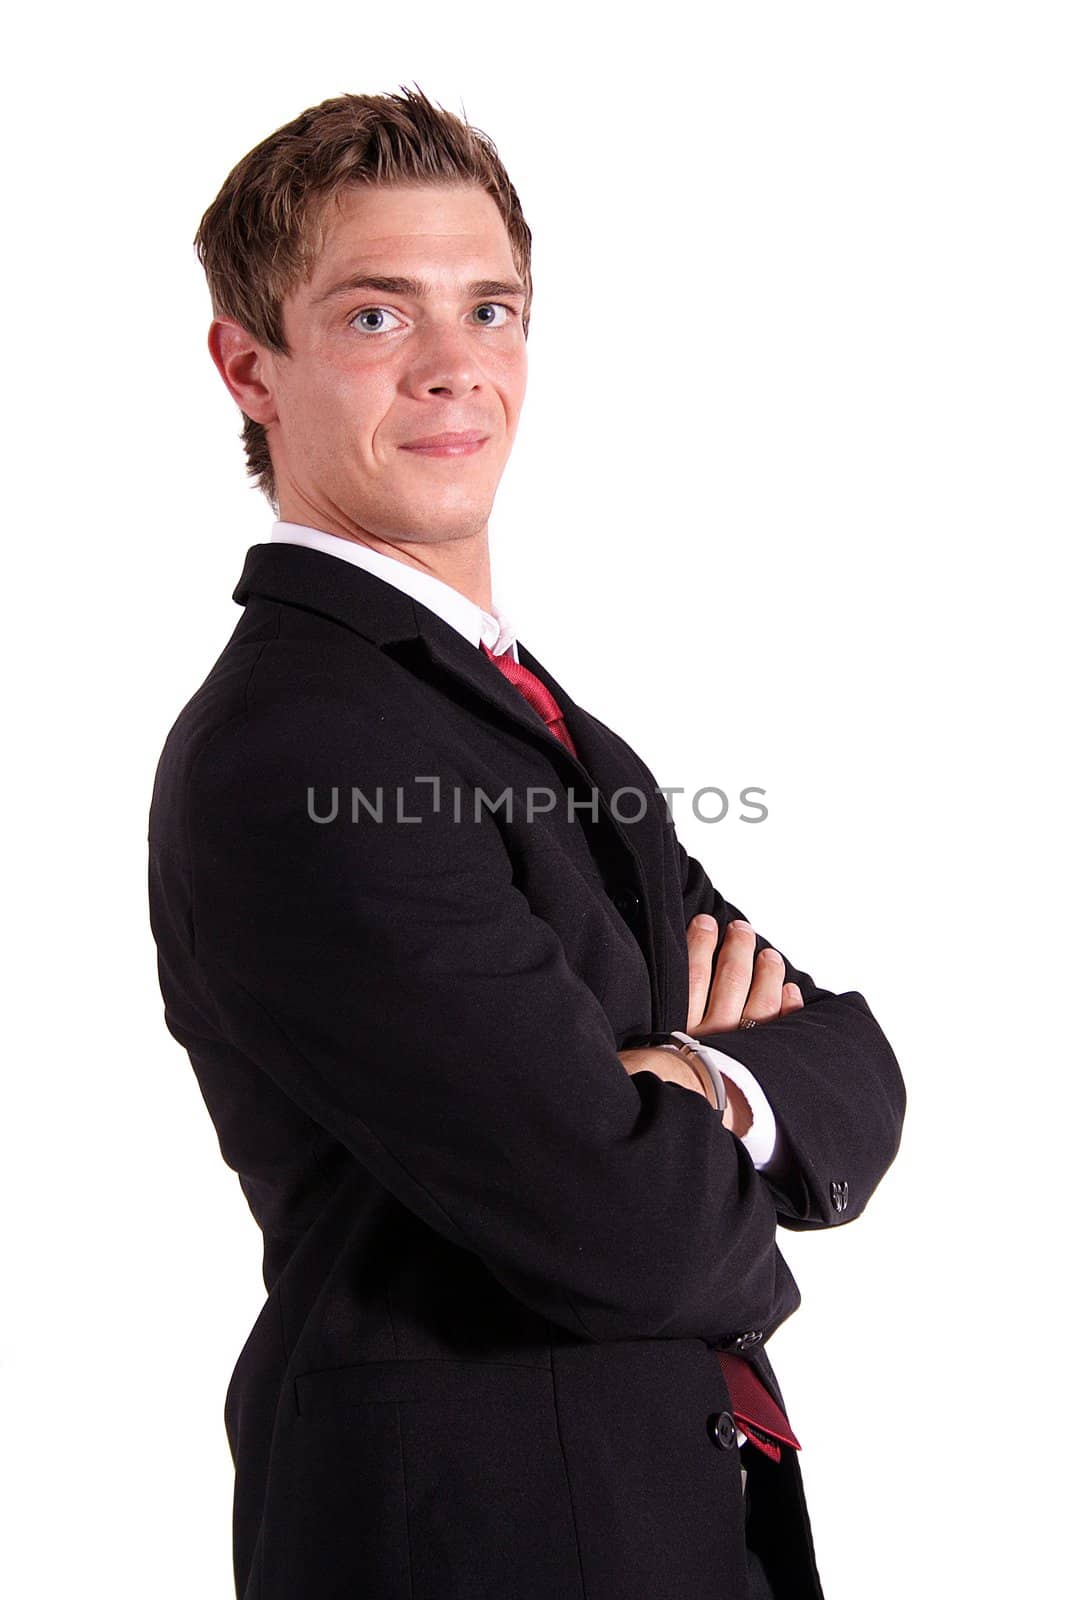 An ambitious businessman. All isolated on white background.